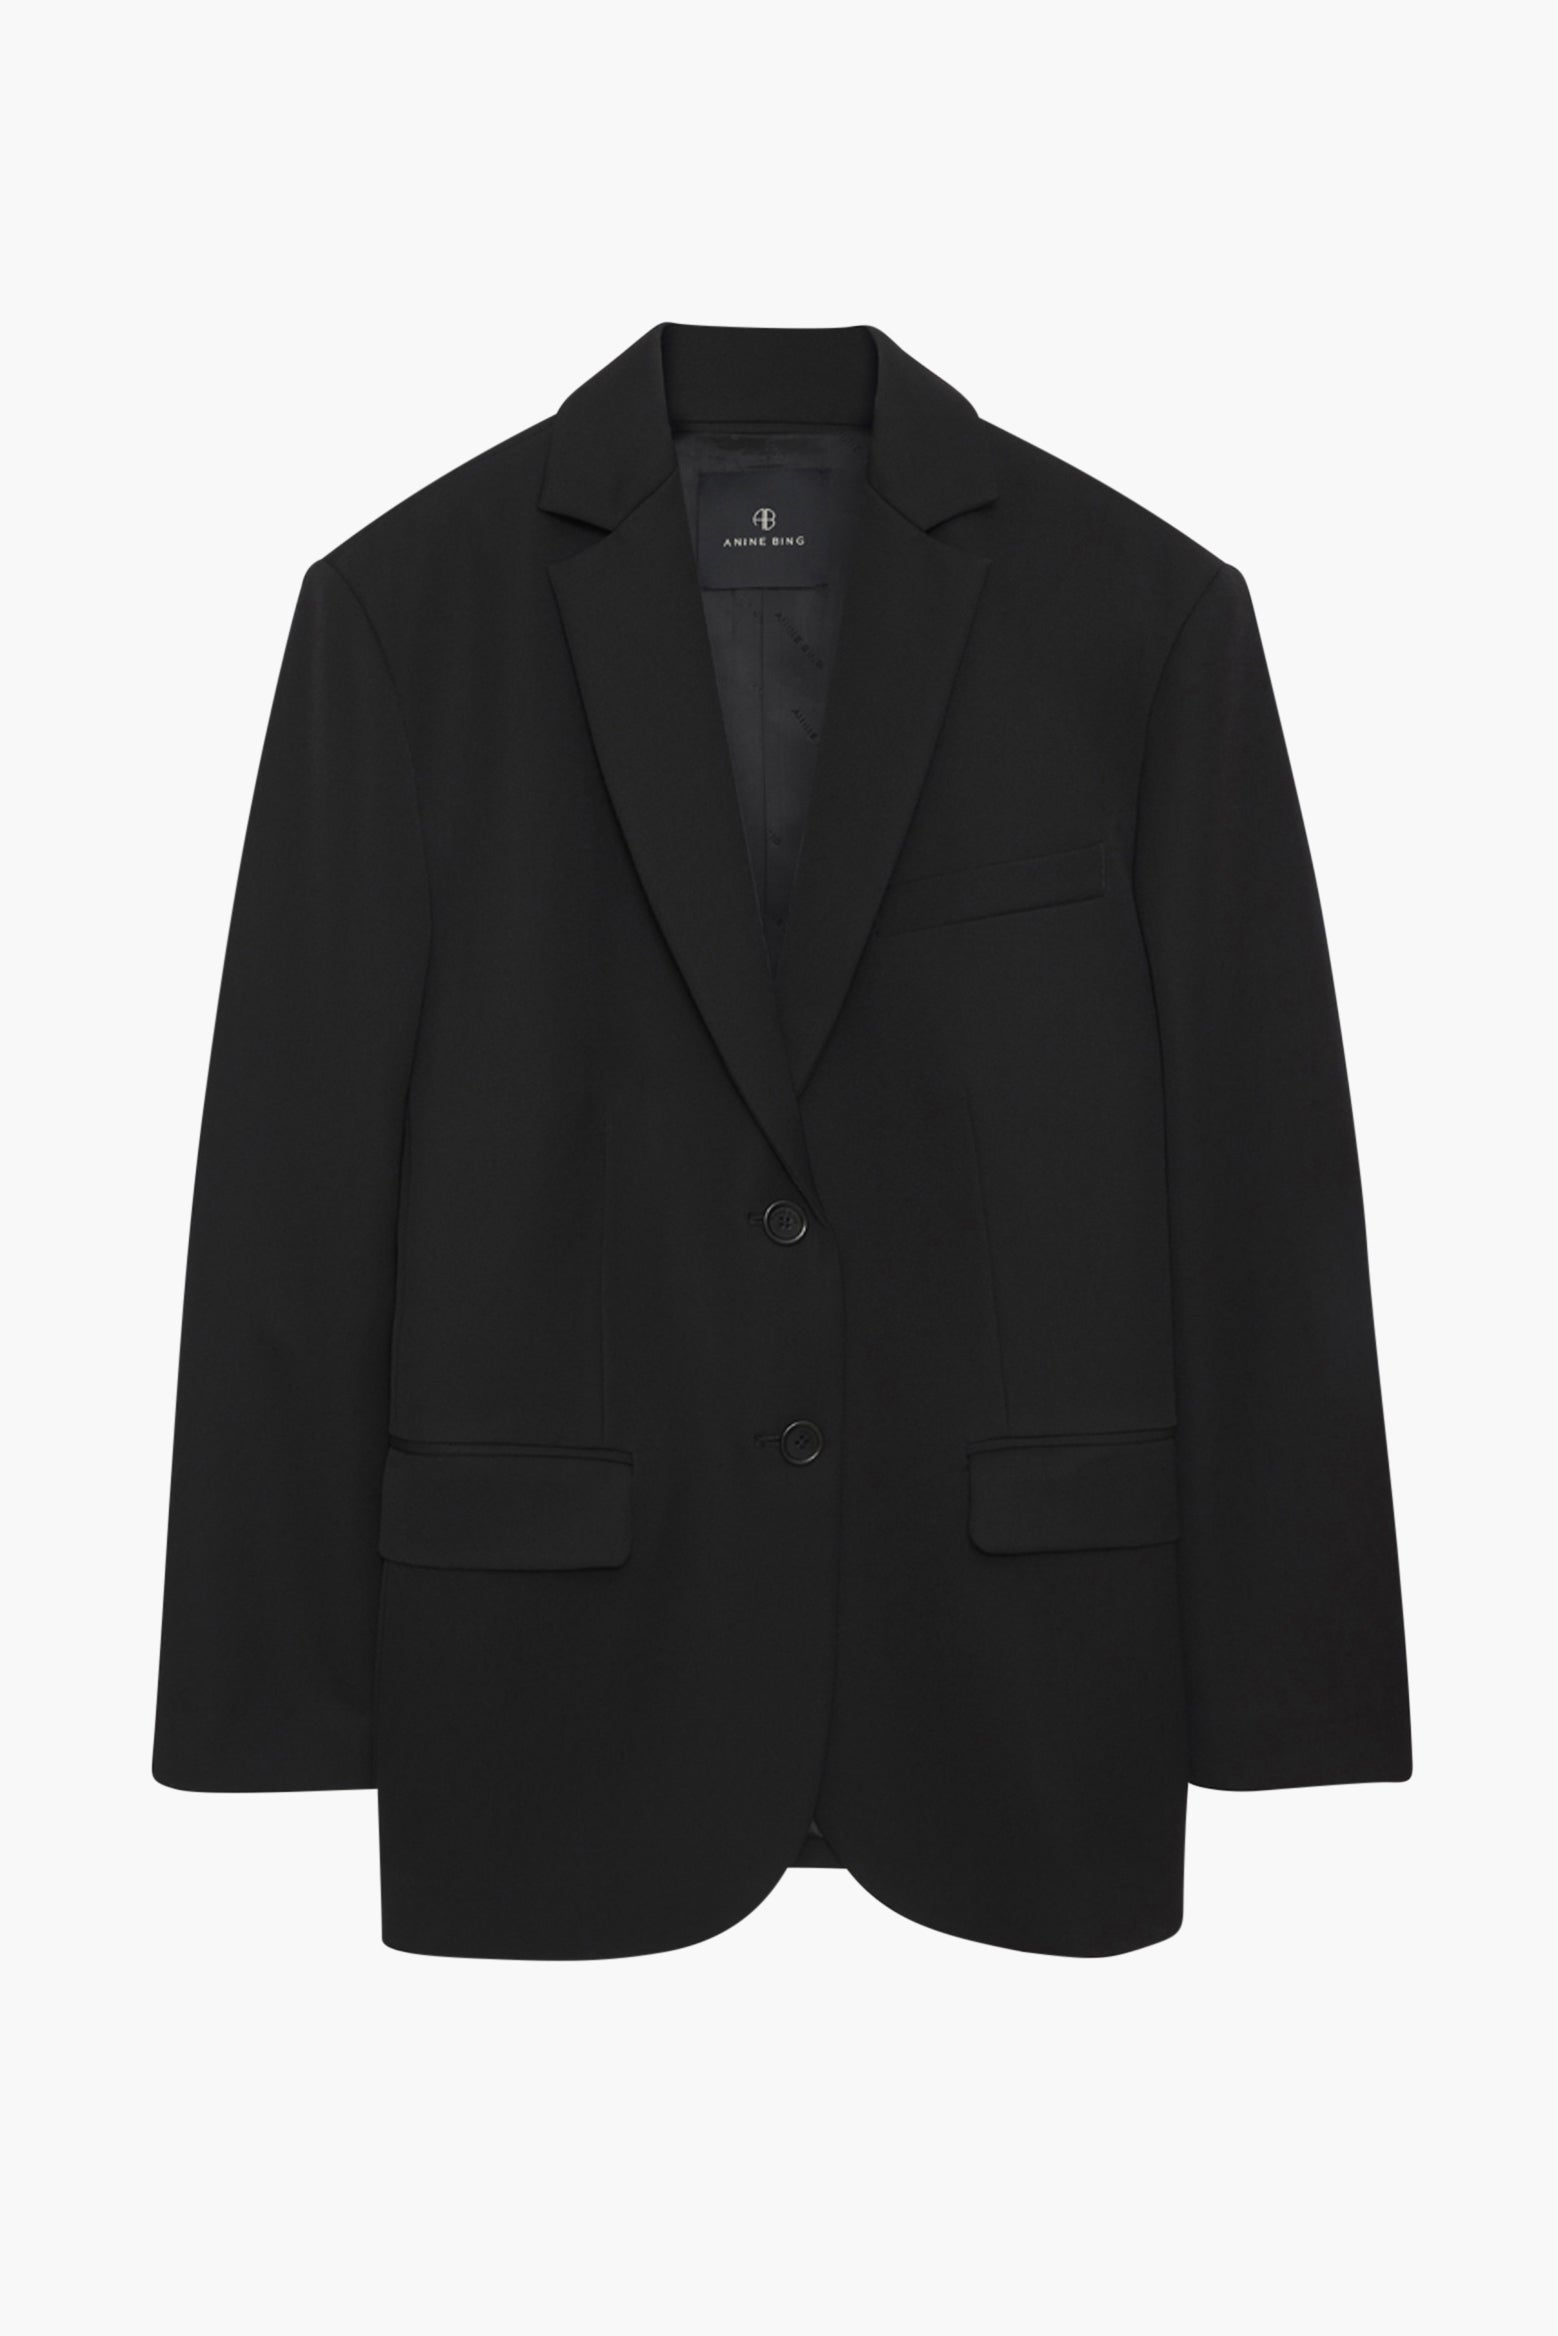 Anine Bing Quinn Blazer in Black available at TNT The New Trend Australia.